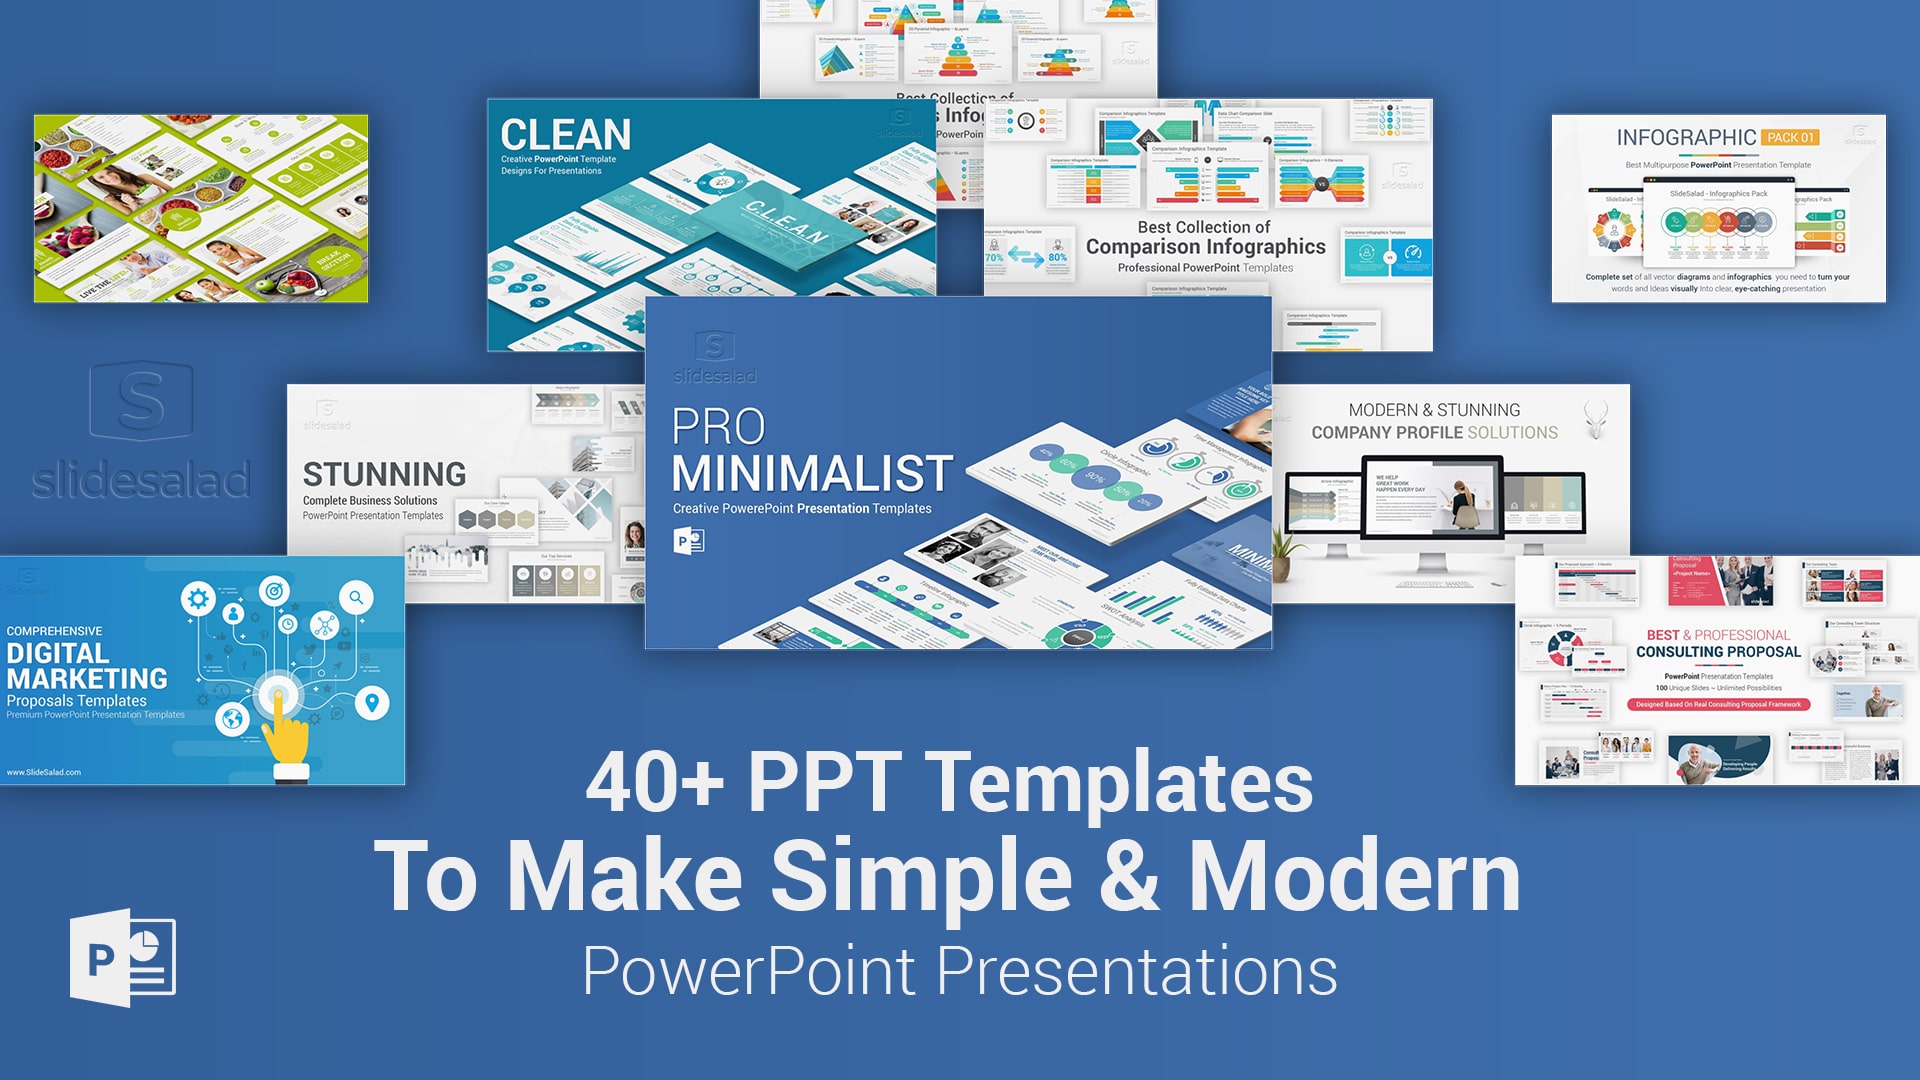 40 Minimalist Ppt Templates To Make Simple Modern Powerpoint Presentations In 21 Slidesalad